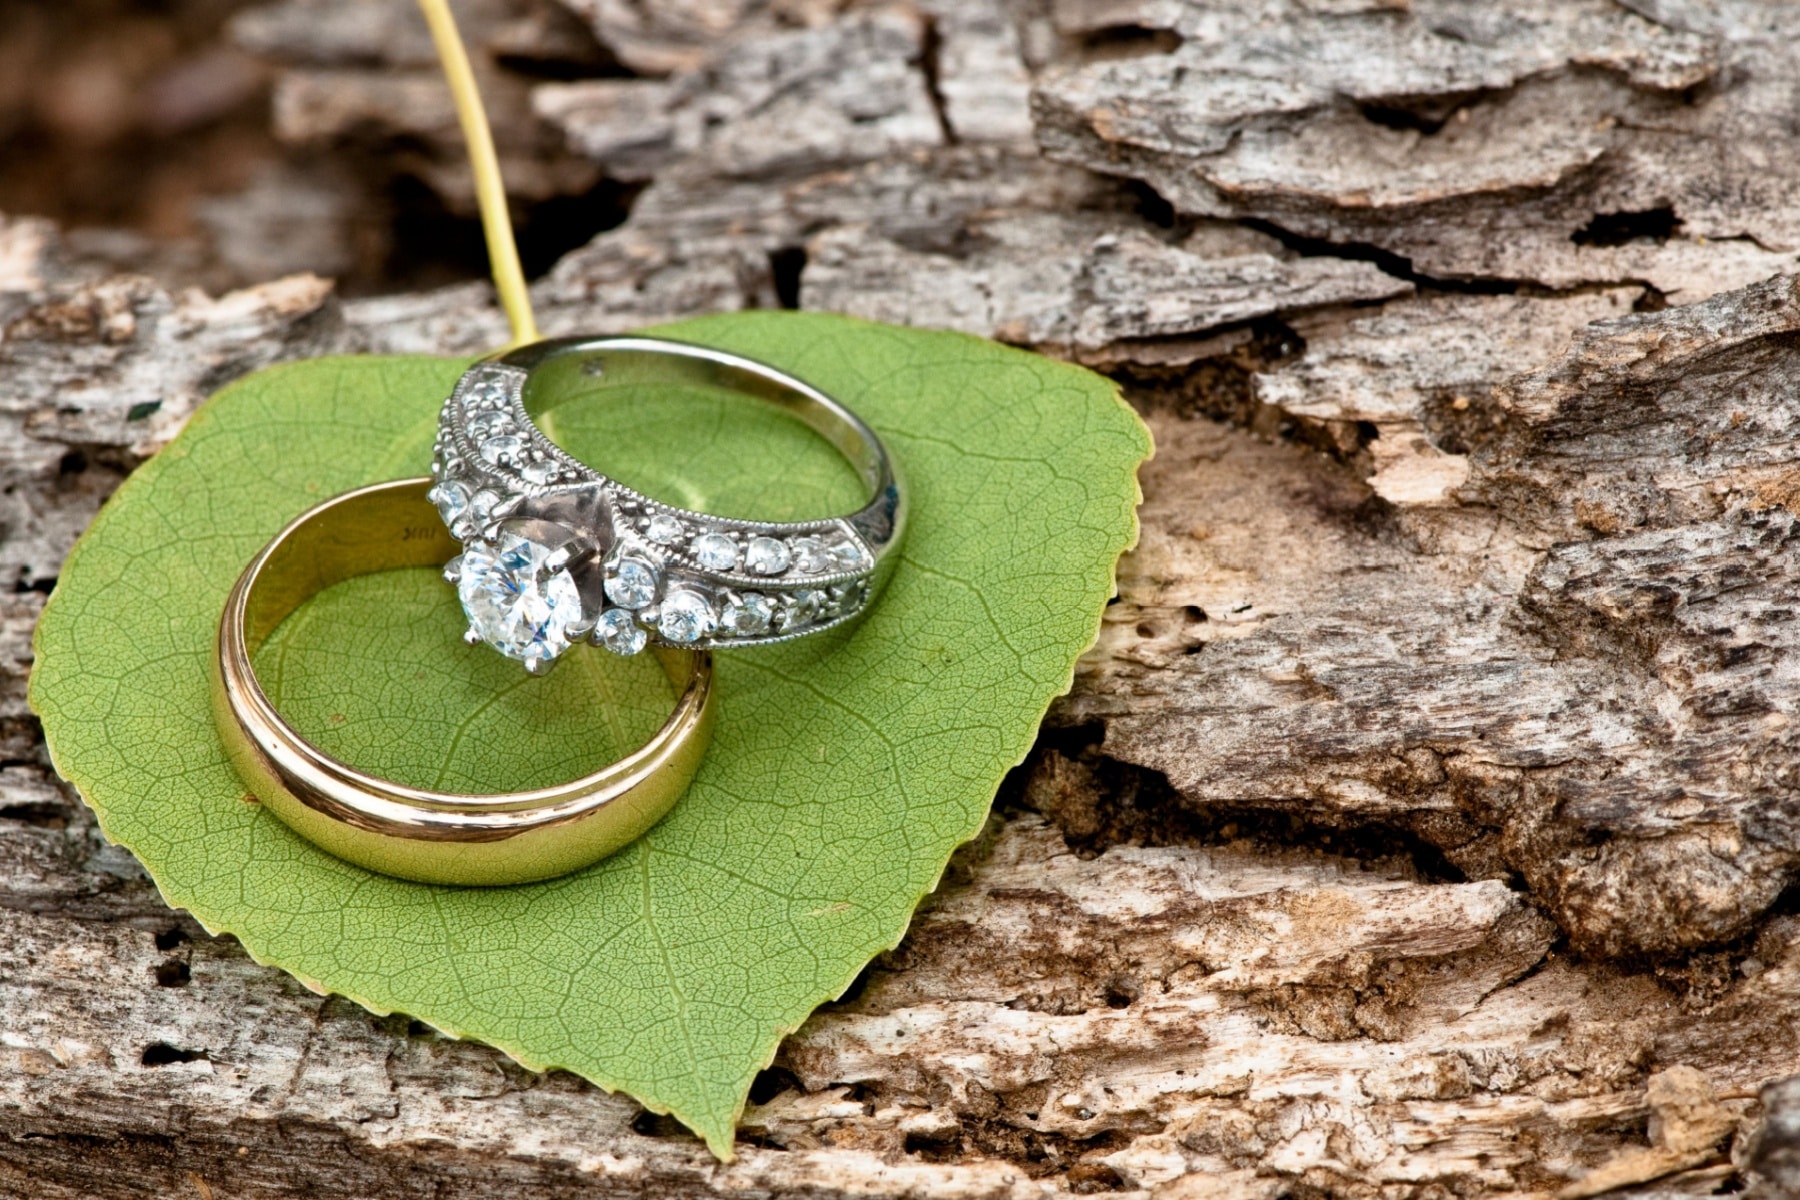 Two wedding rings on a leaf surrounded by rocks